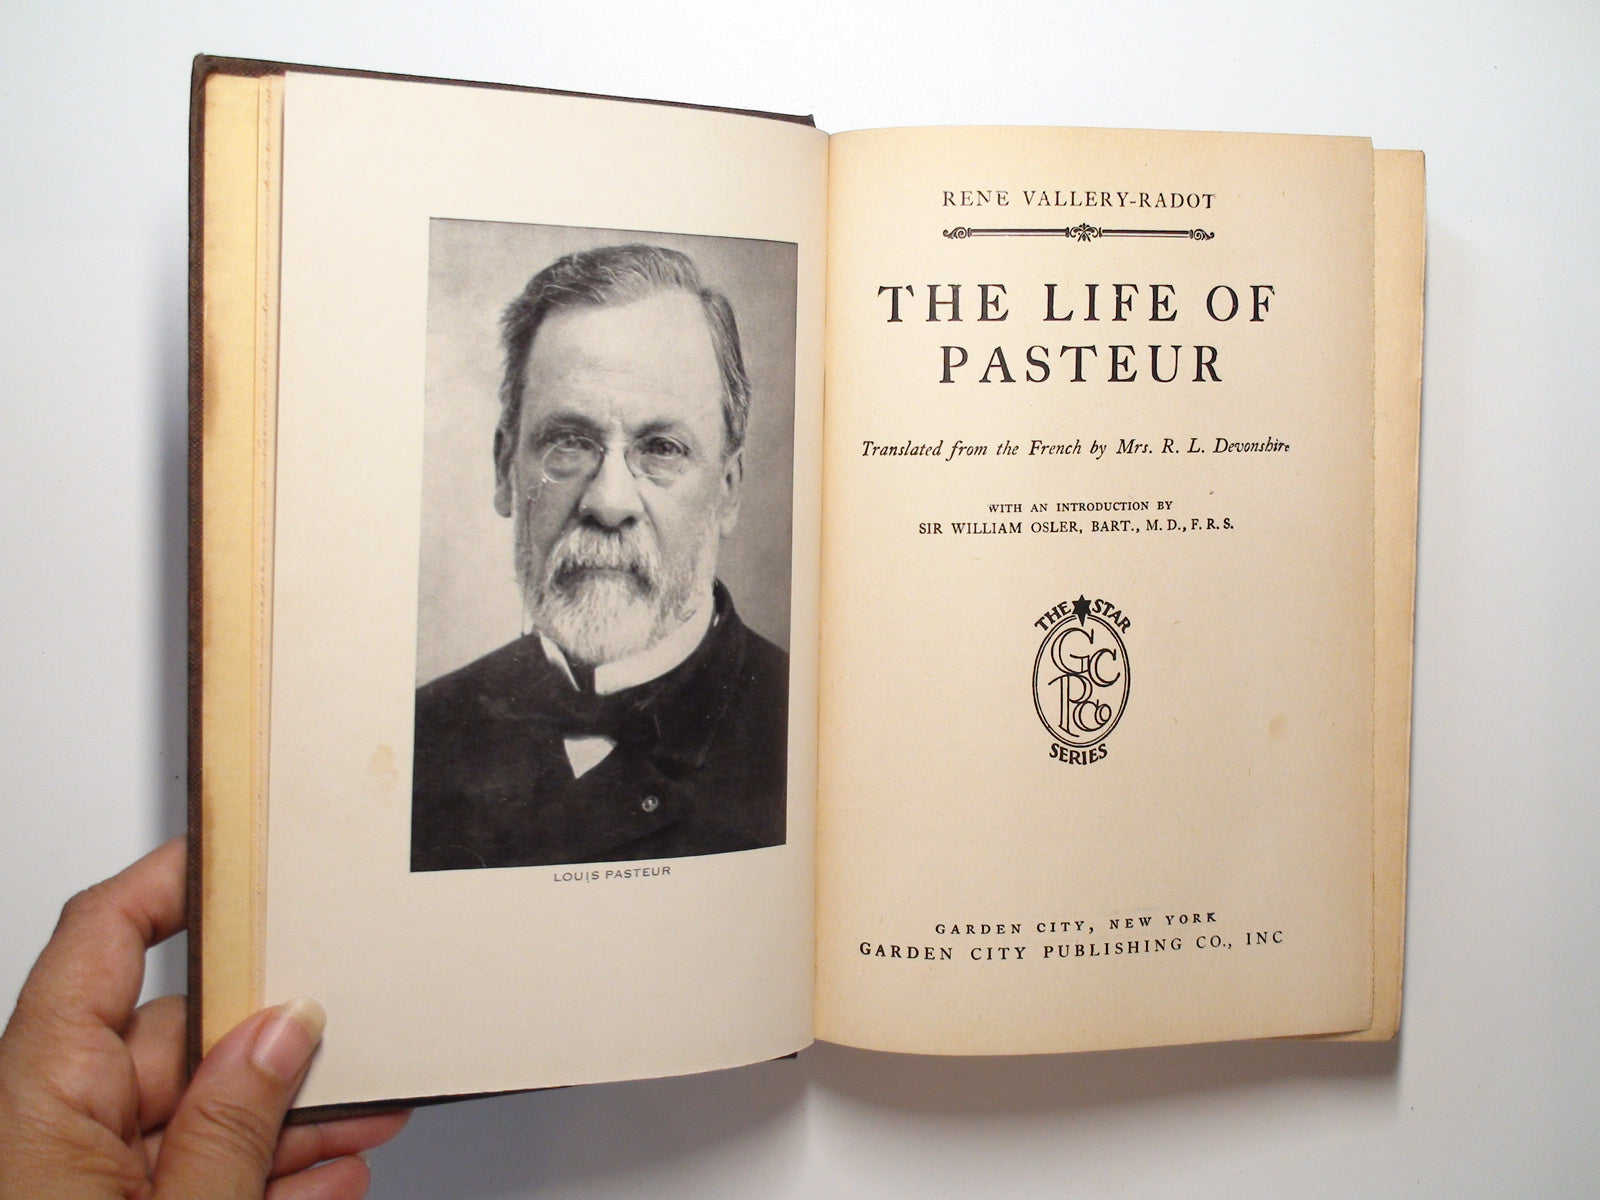 The Life of Pasteur, by Mrs. R. L. Dovonshire, Rene Vallery-Radot, c1930s